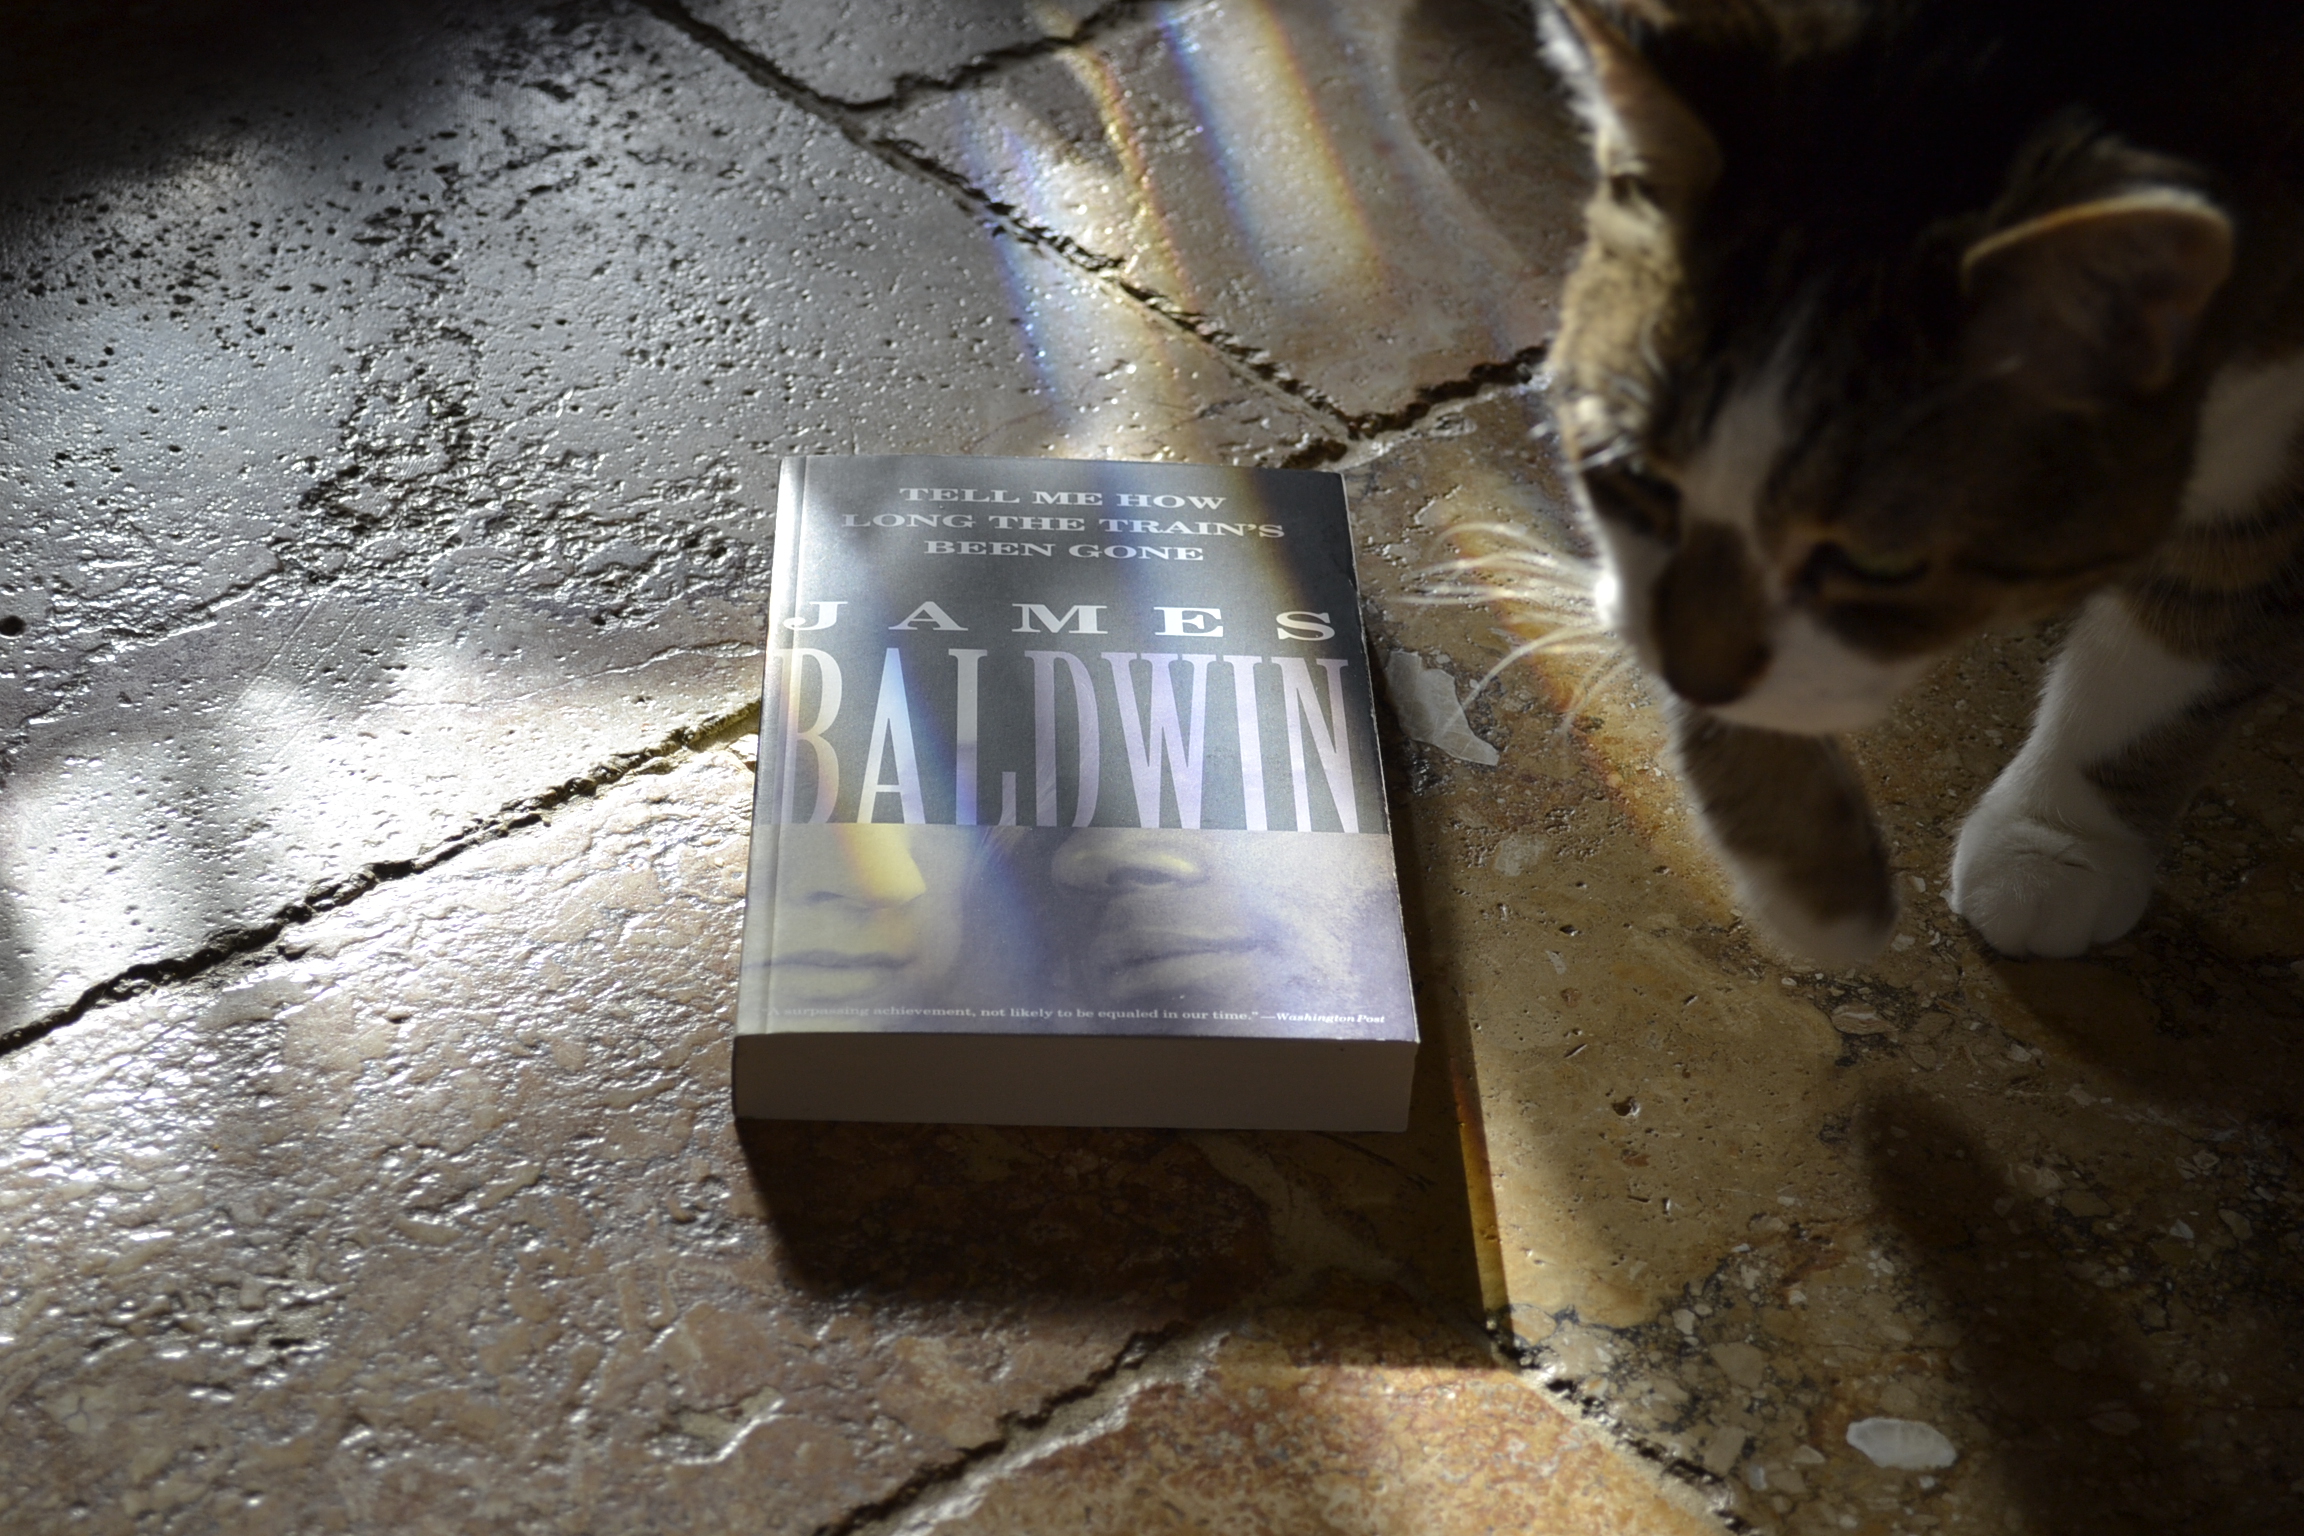 A tabby cat walks past a copy of Tell Me How Long the Train's Been Gone.